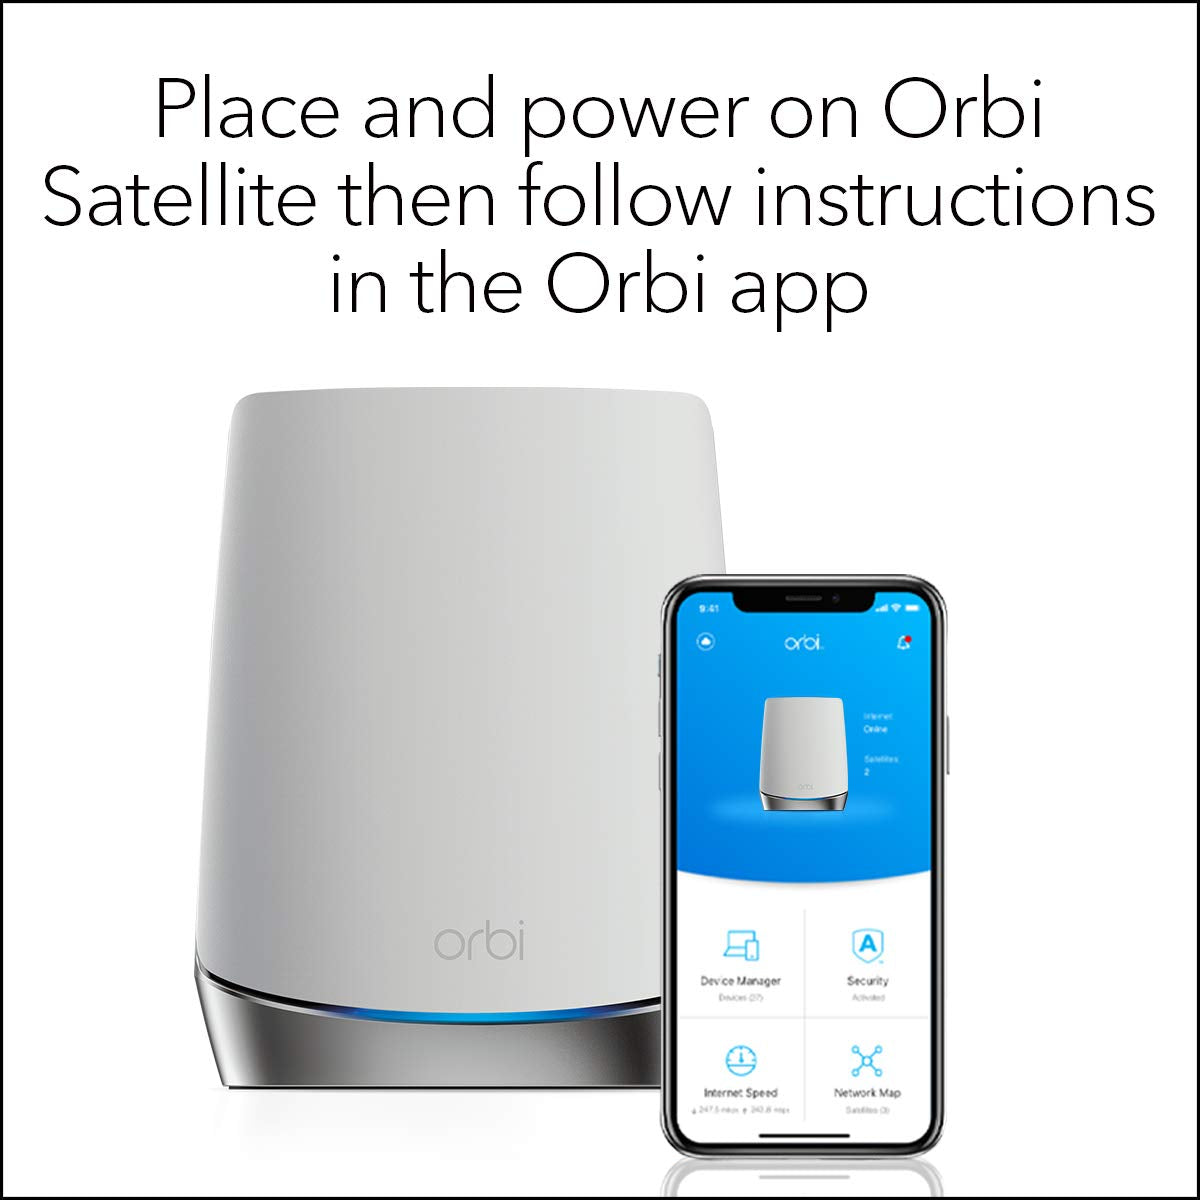 NETGEAR Orbi Whole Home Tri-band Mesh WiFi 6 Add-on Satellite (RBS750) – Works with Your Orbi WiFi 6 System| Adds up to 2,500 sq. ft. Coverage | AX4200 (Up to 4.2Gbps)